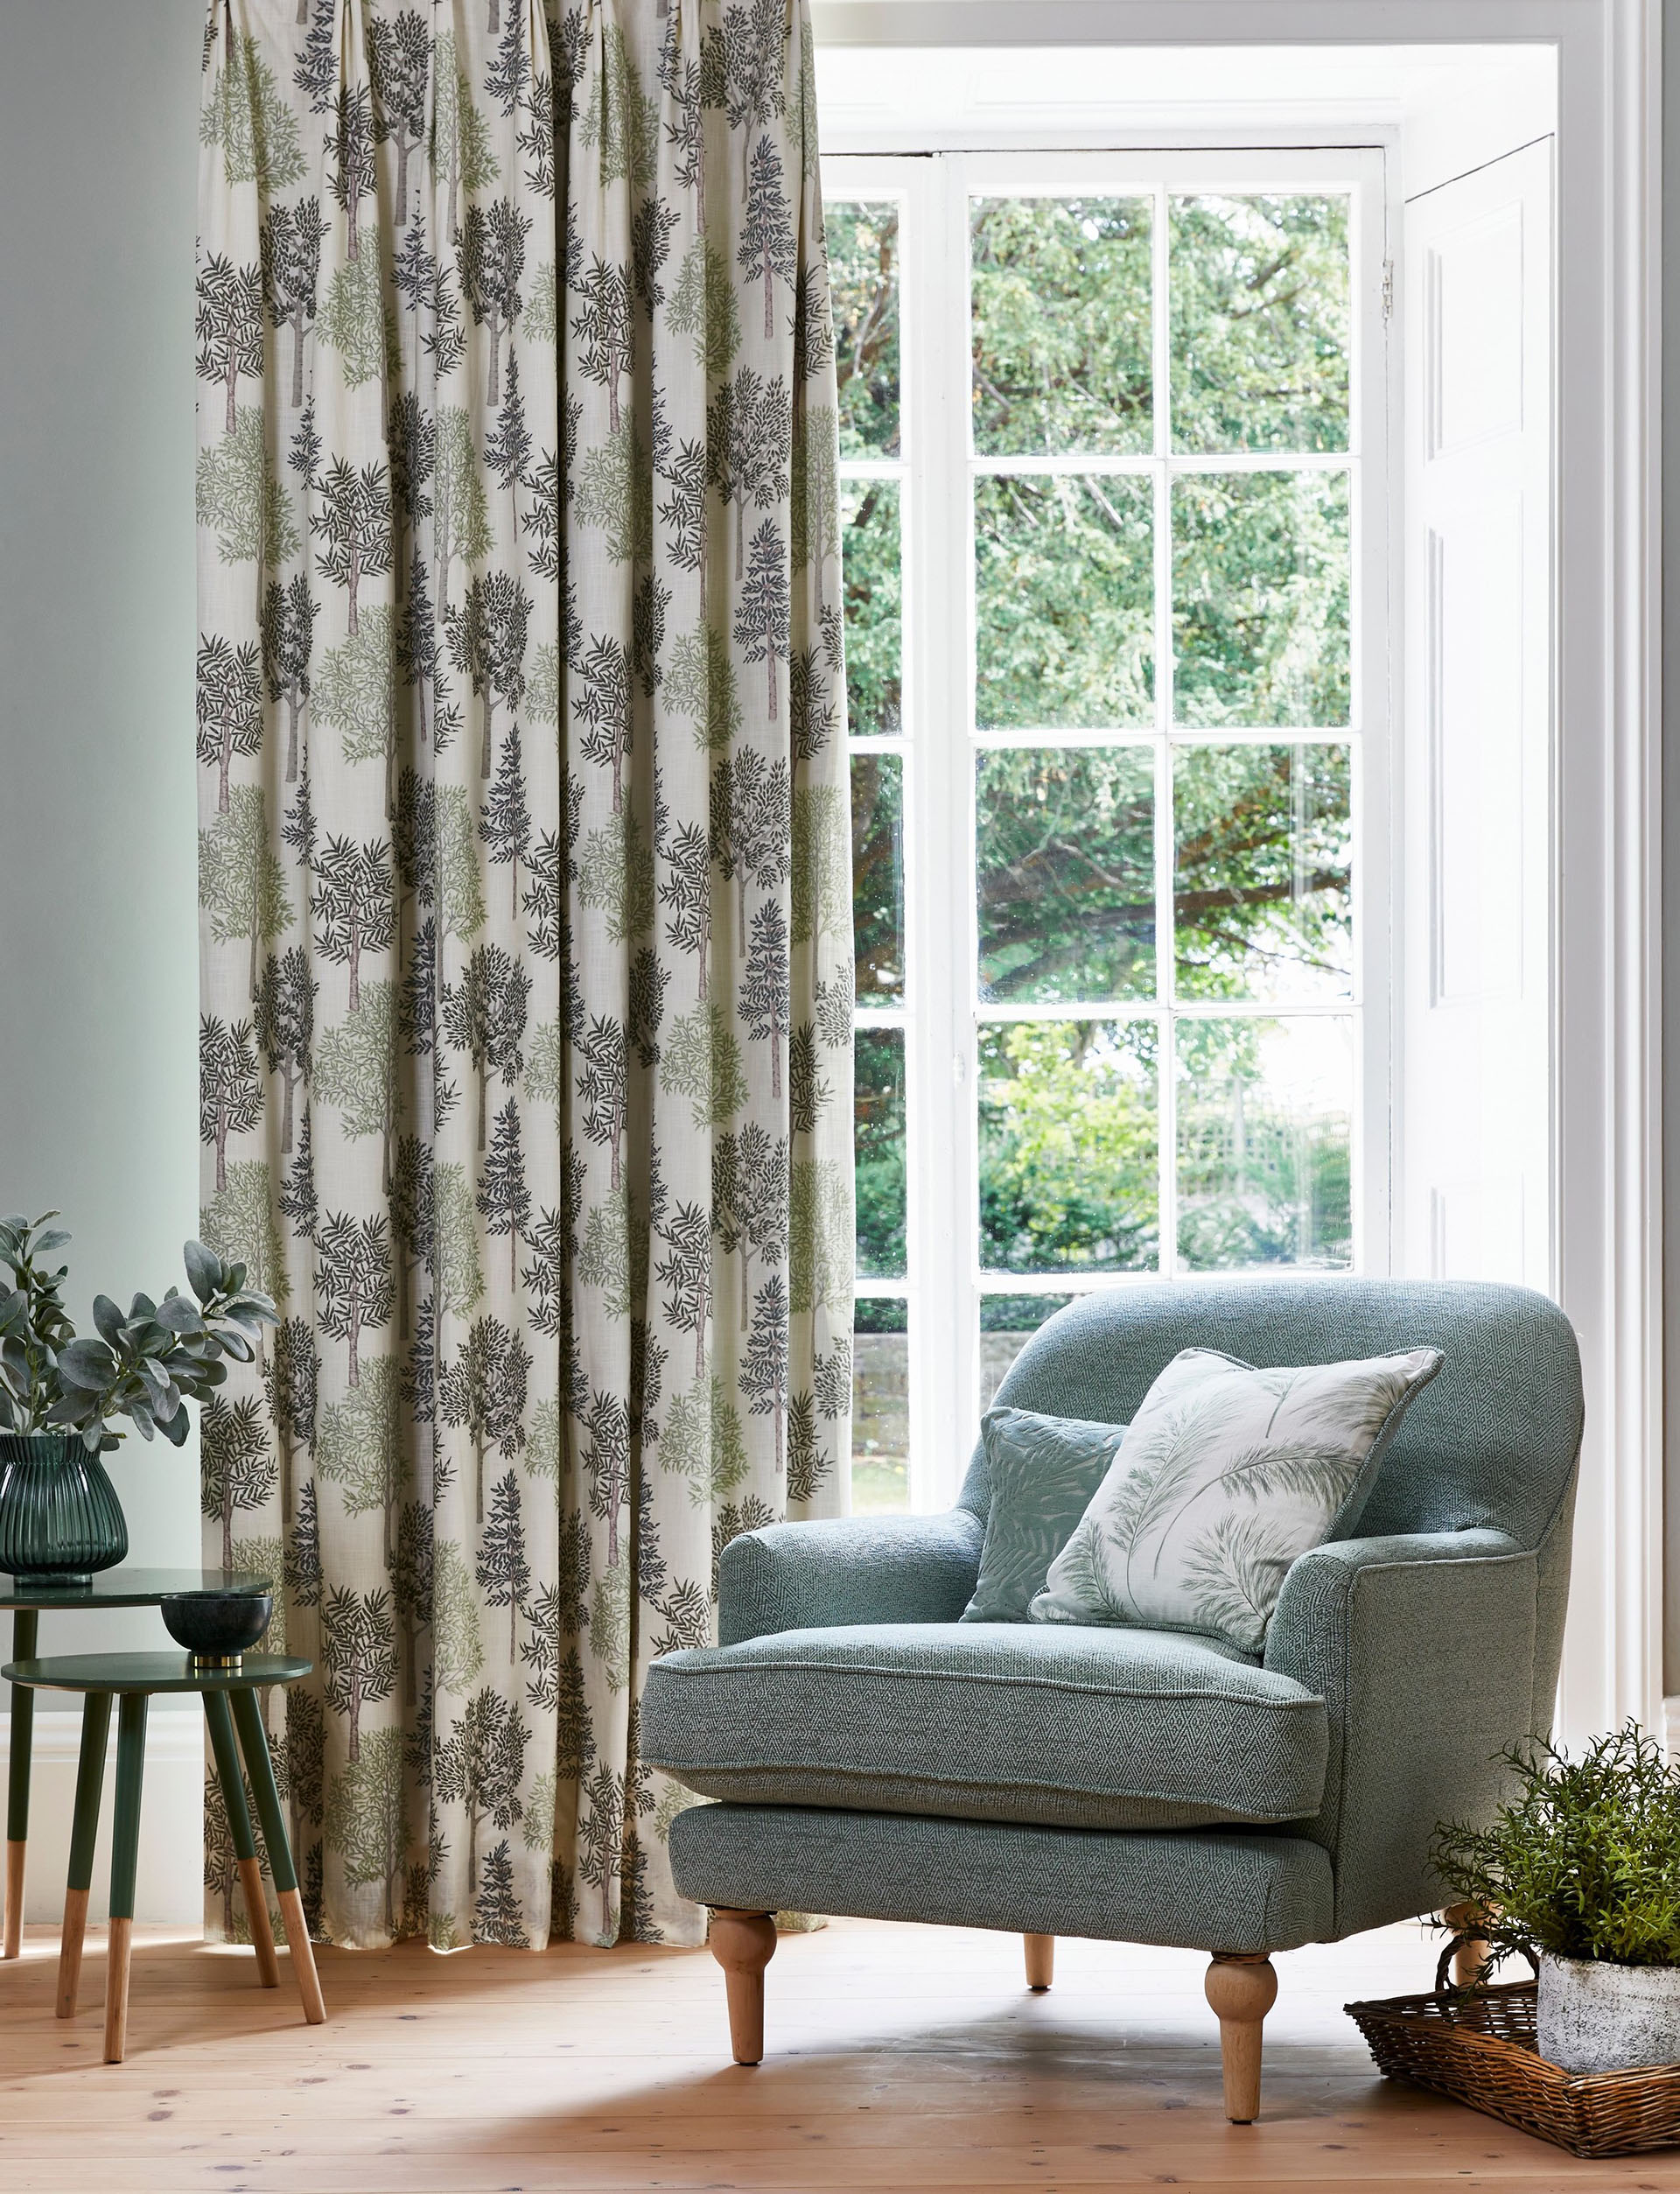 5. Library Custom Made Curtains - Coppice Apple